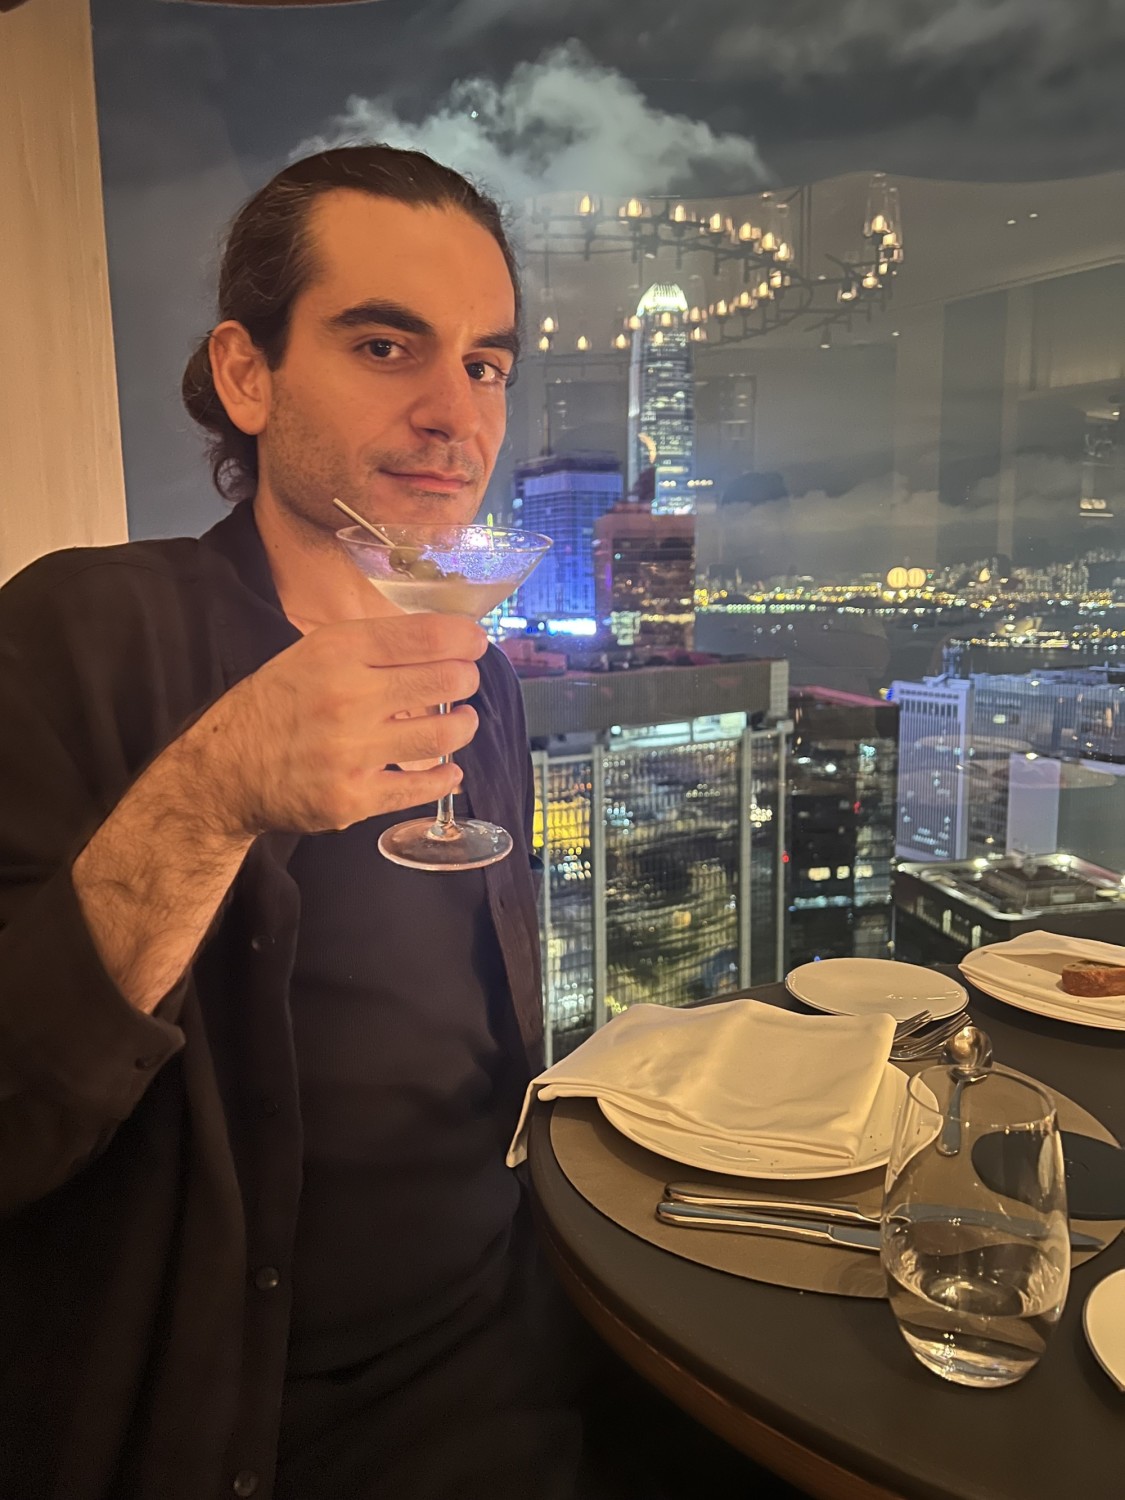 Alex raising his cocktail, at a table of the hotel's bar with a view of Hong Kong in the background.